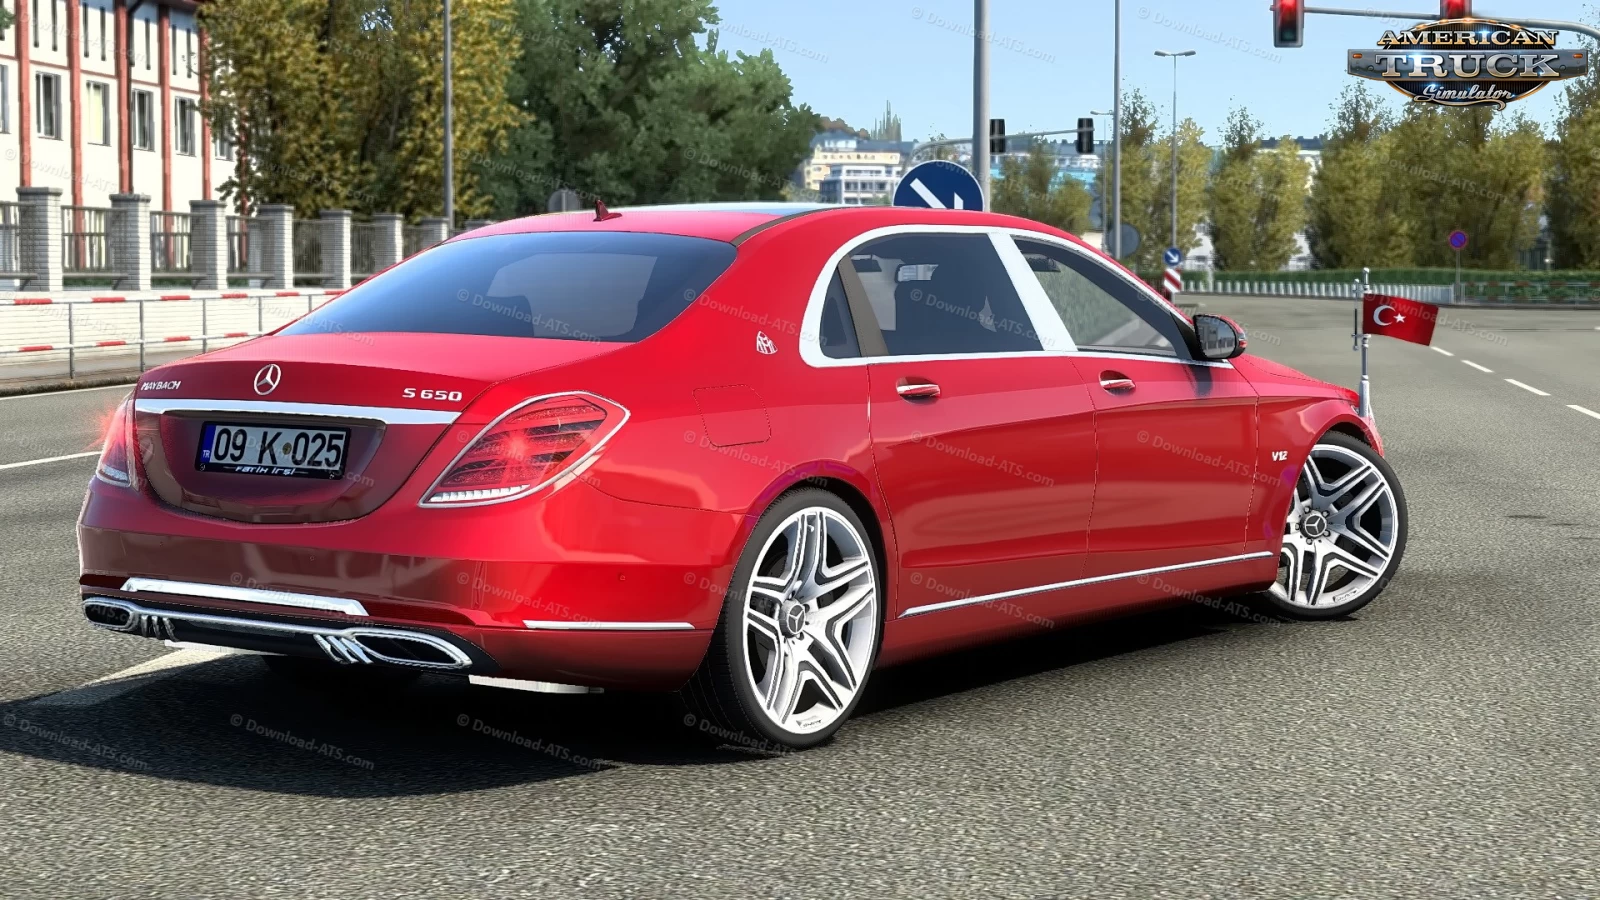 Mercedes-Benz Maybach S650 v1.3 (1.46.x) for ATS